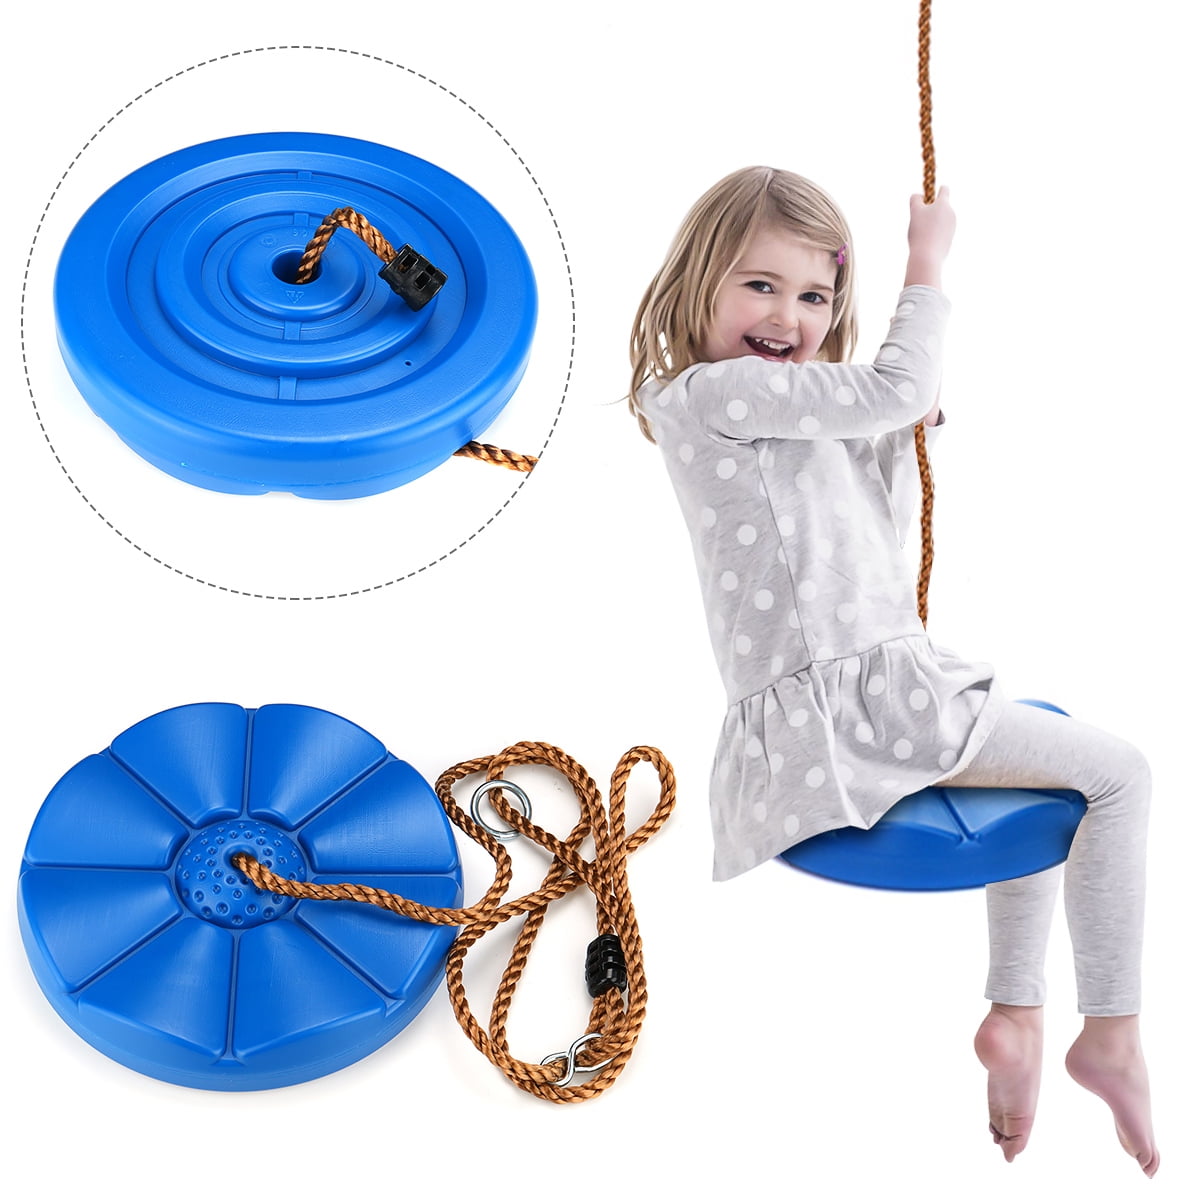 150KG Plastic Disc Seat With Rope Play Ground Indoor Outdoor Swing Sets Kids Toy 